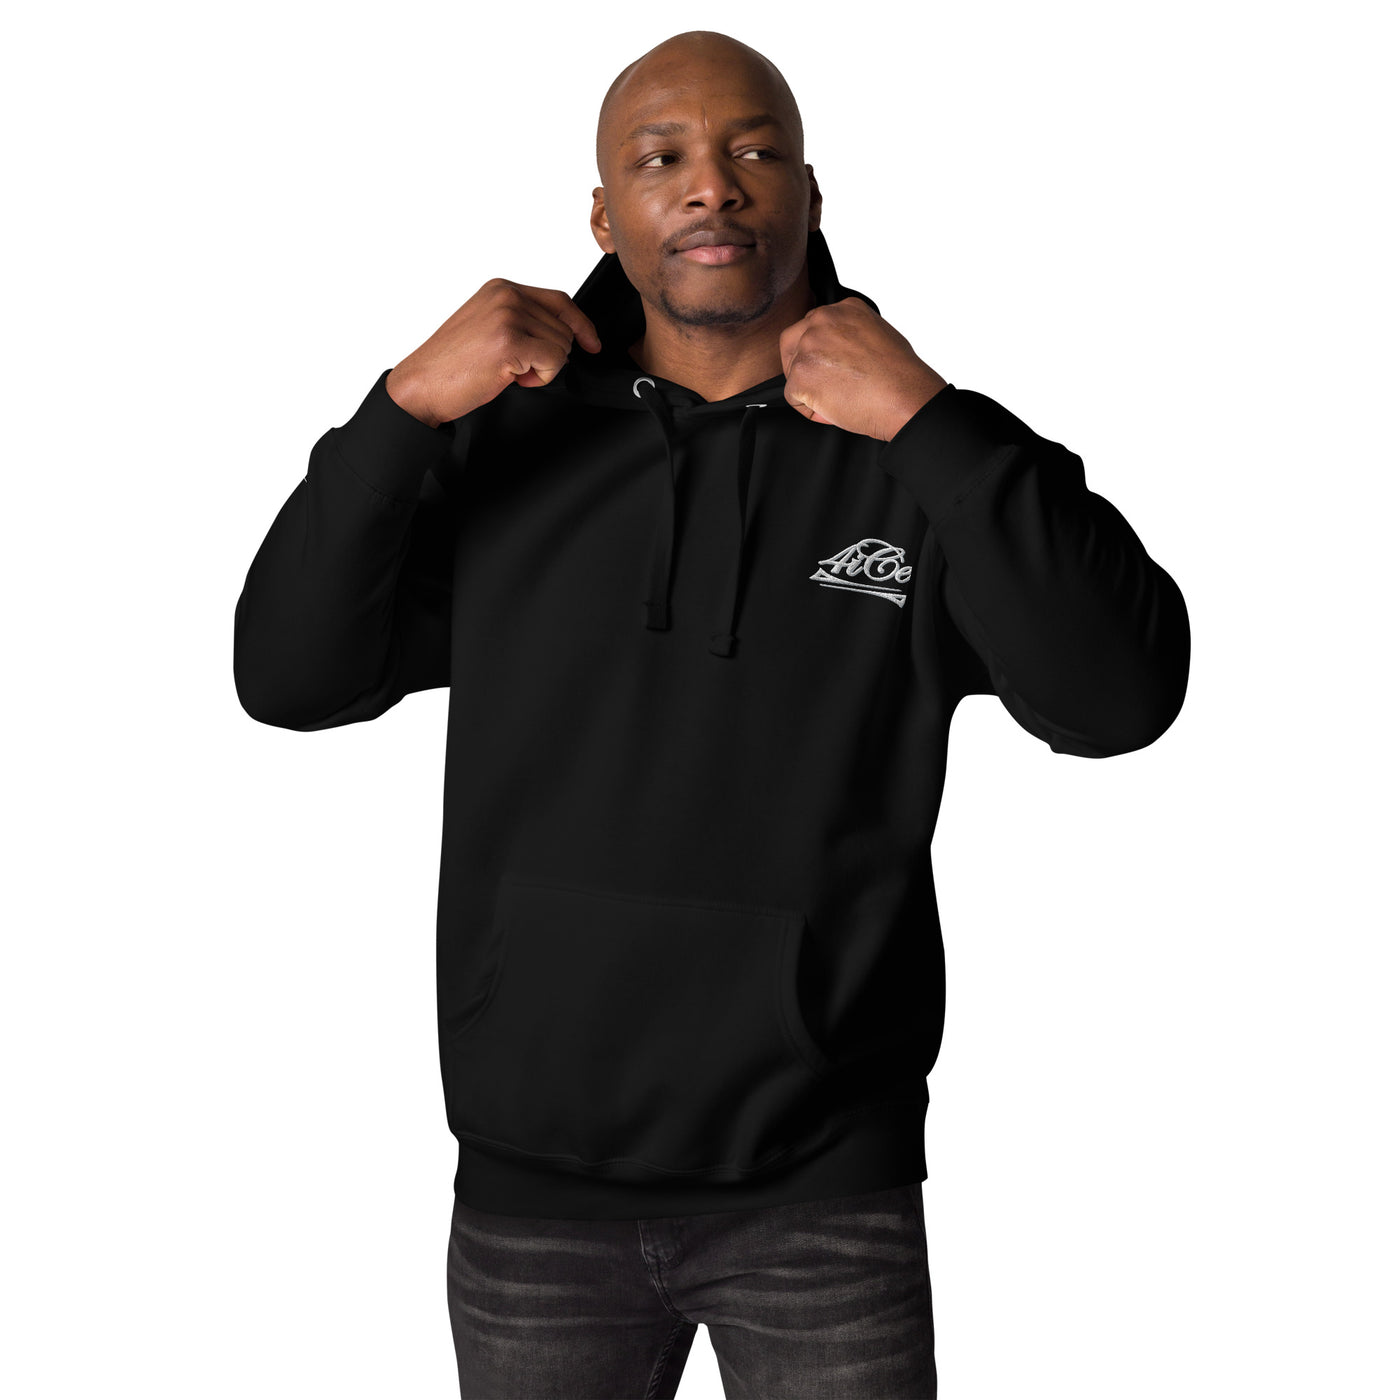 4iCe® Lil Elite Boxing embroidered hoodie, black